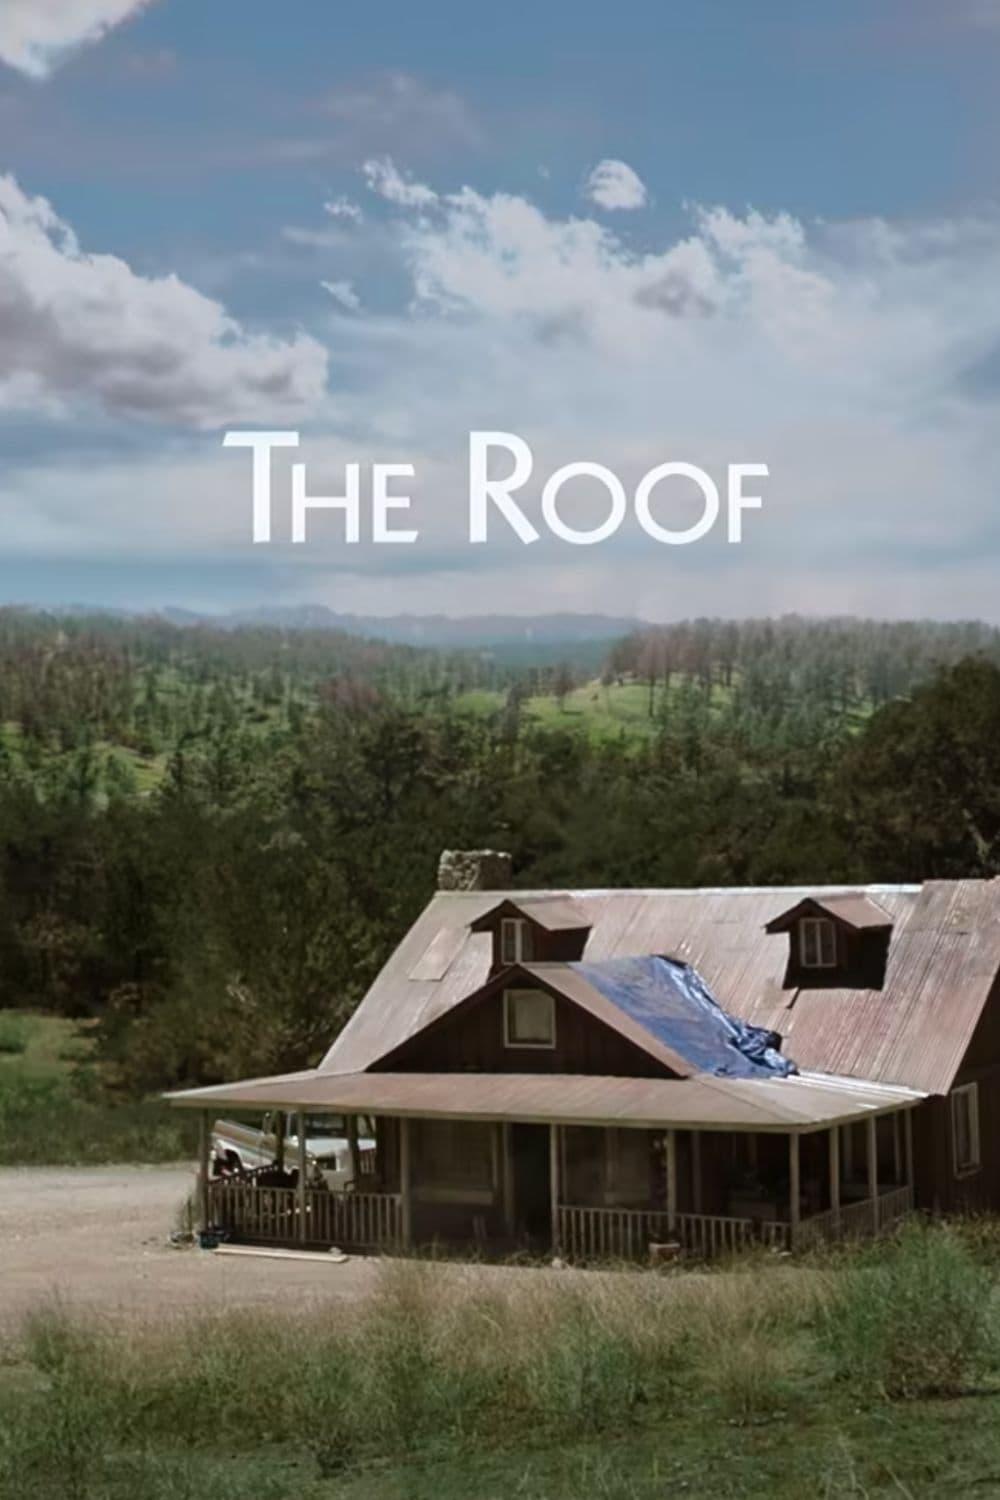 The Roof poster